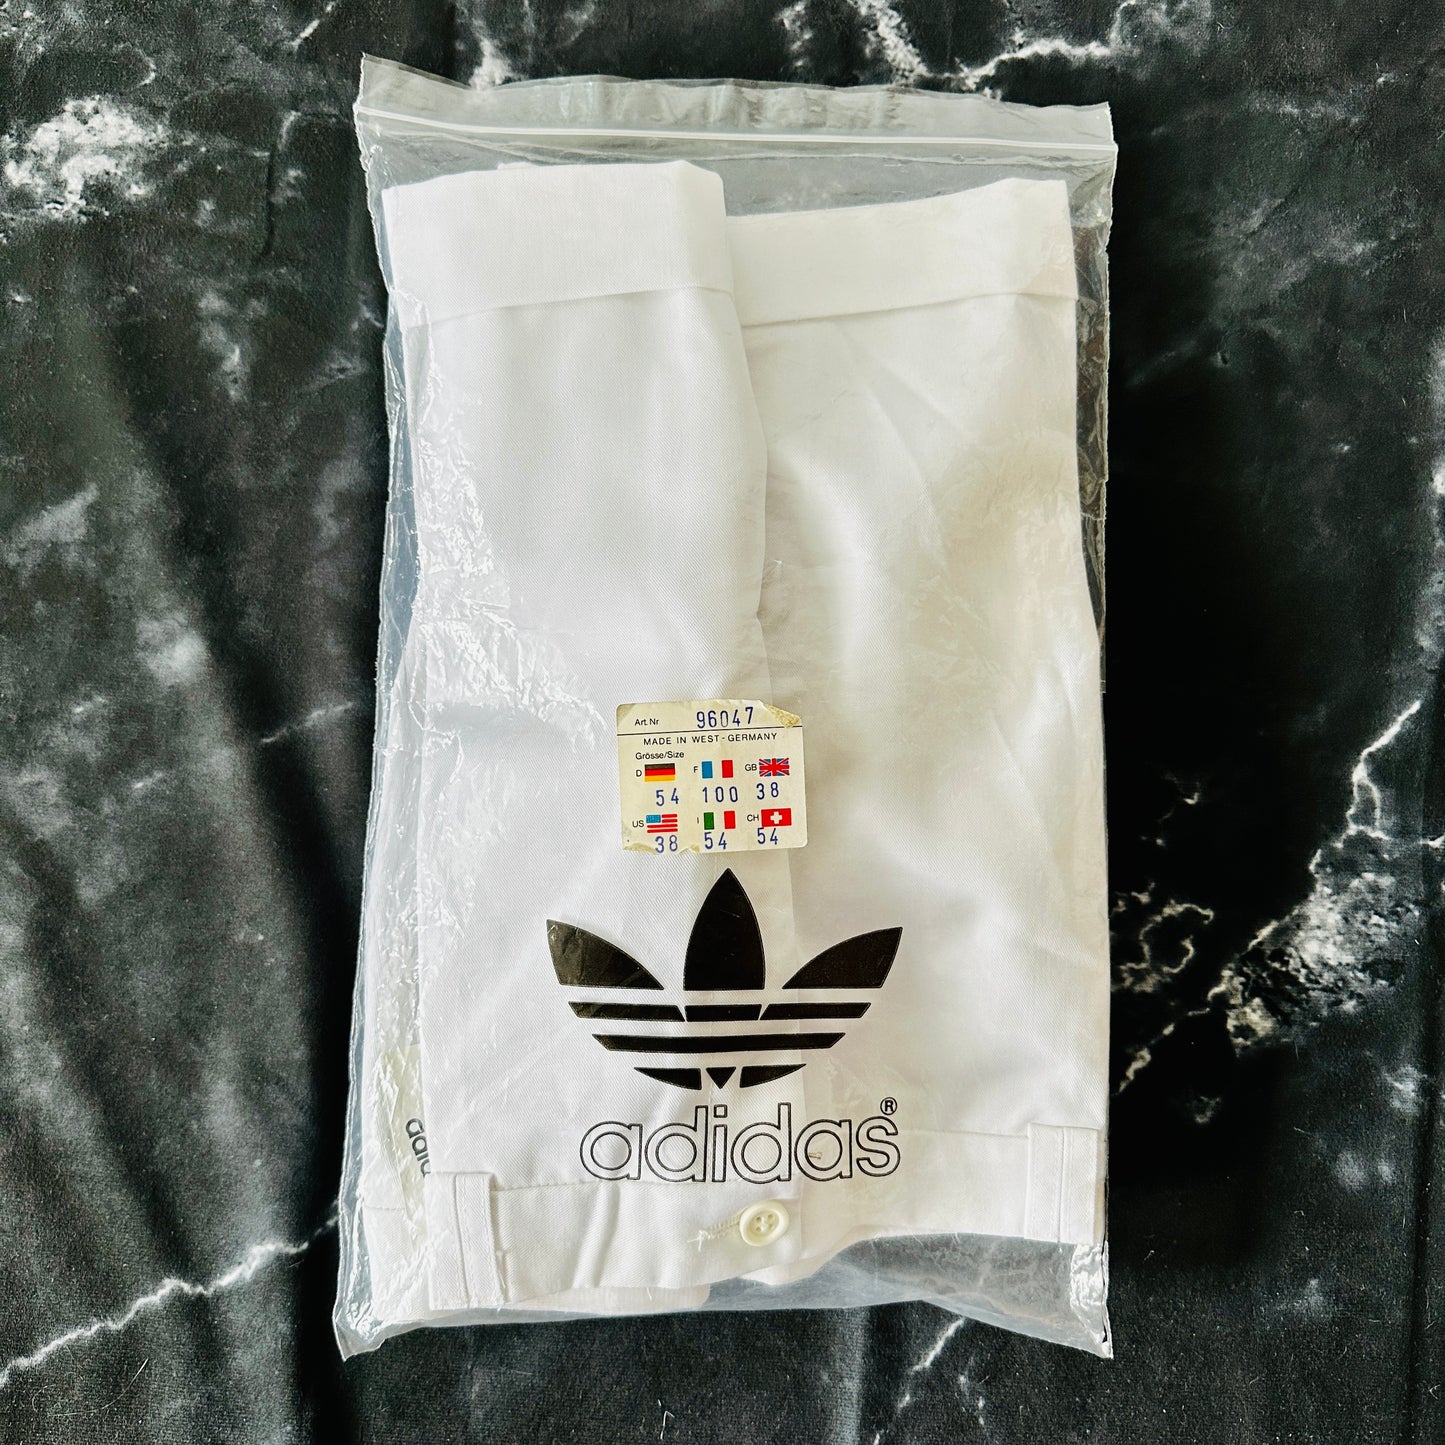 Adidas 80s Vintage Tennis Shorts - Deadstock - 54 / XL - Made in West Germany